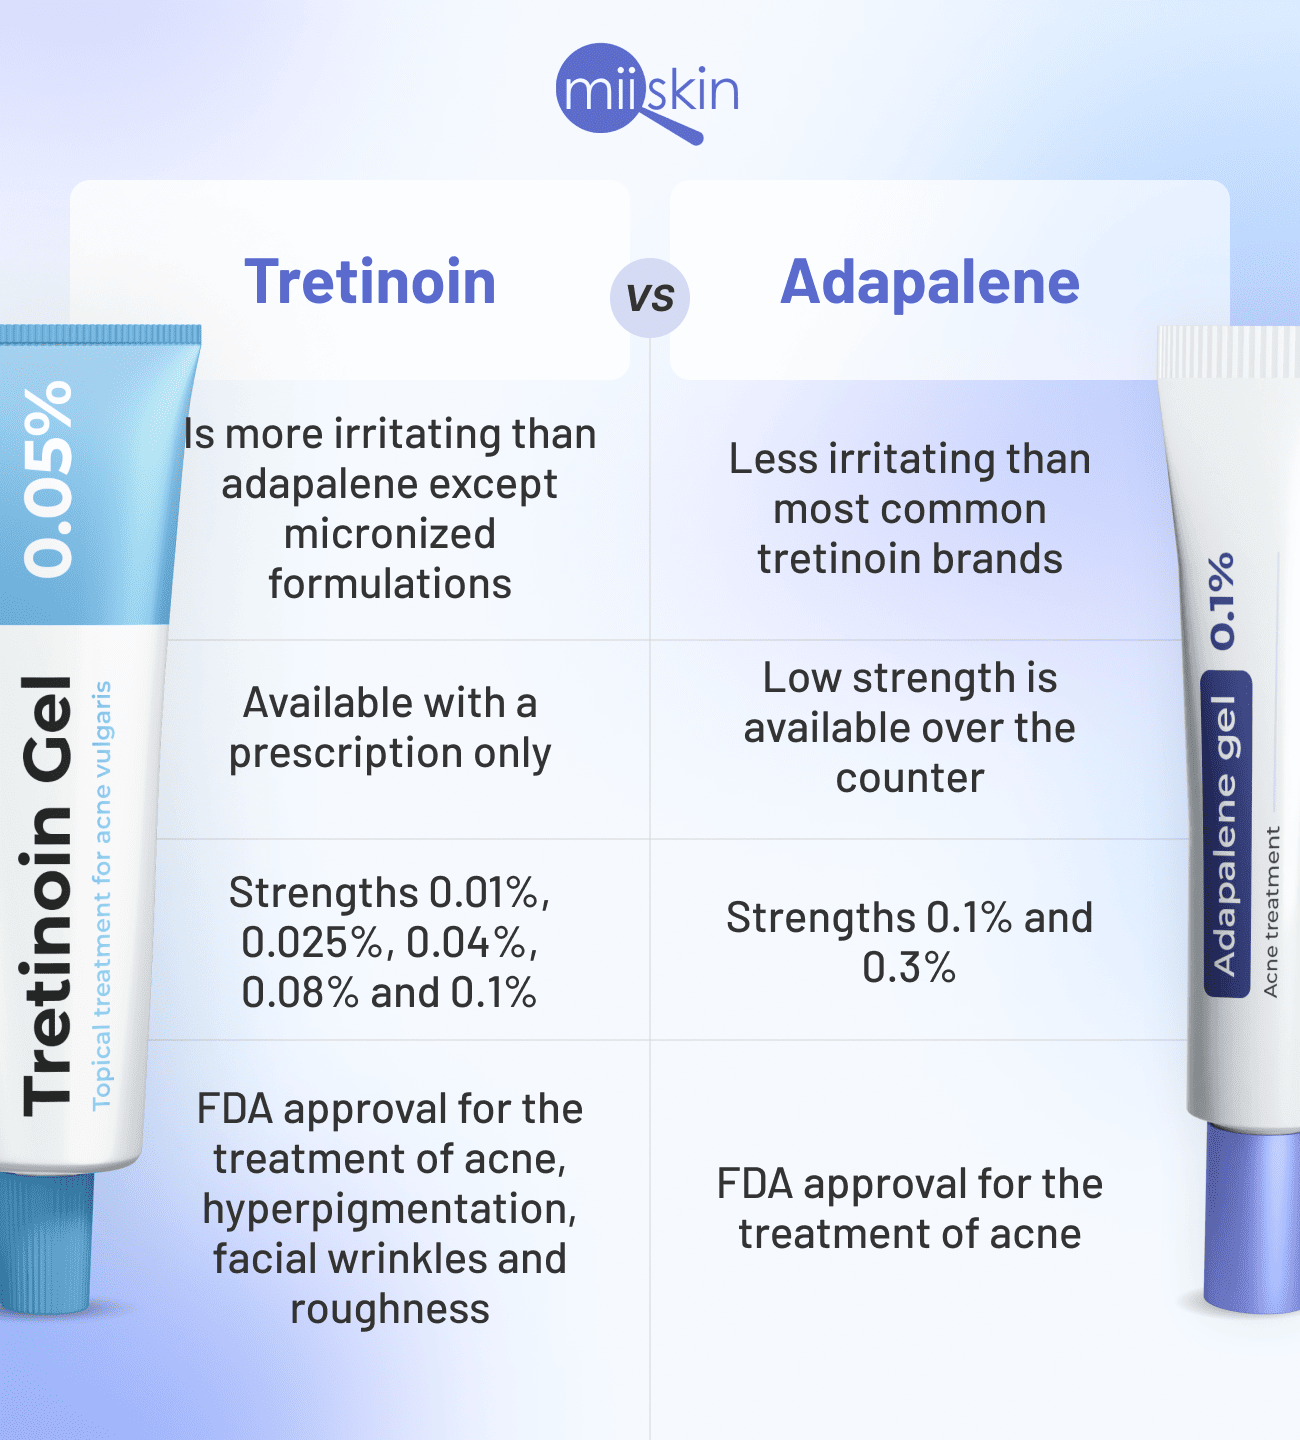 Tretinoin Vs Adapalene: Which One Is Better For Acne?, 55% OFF